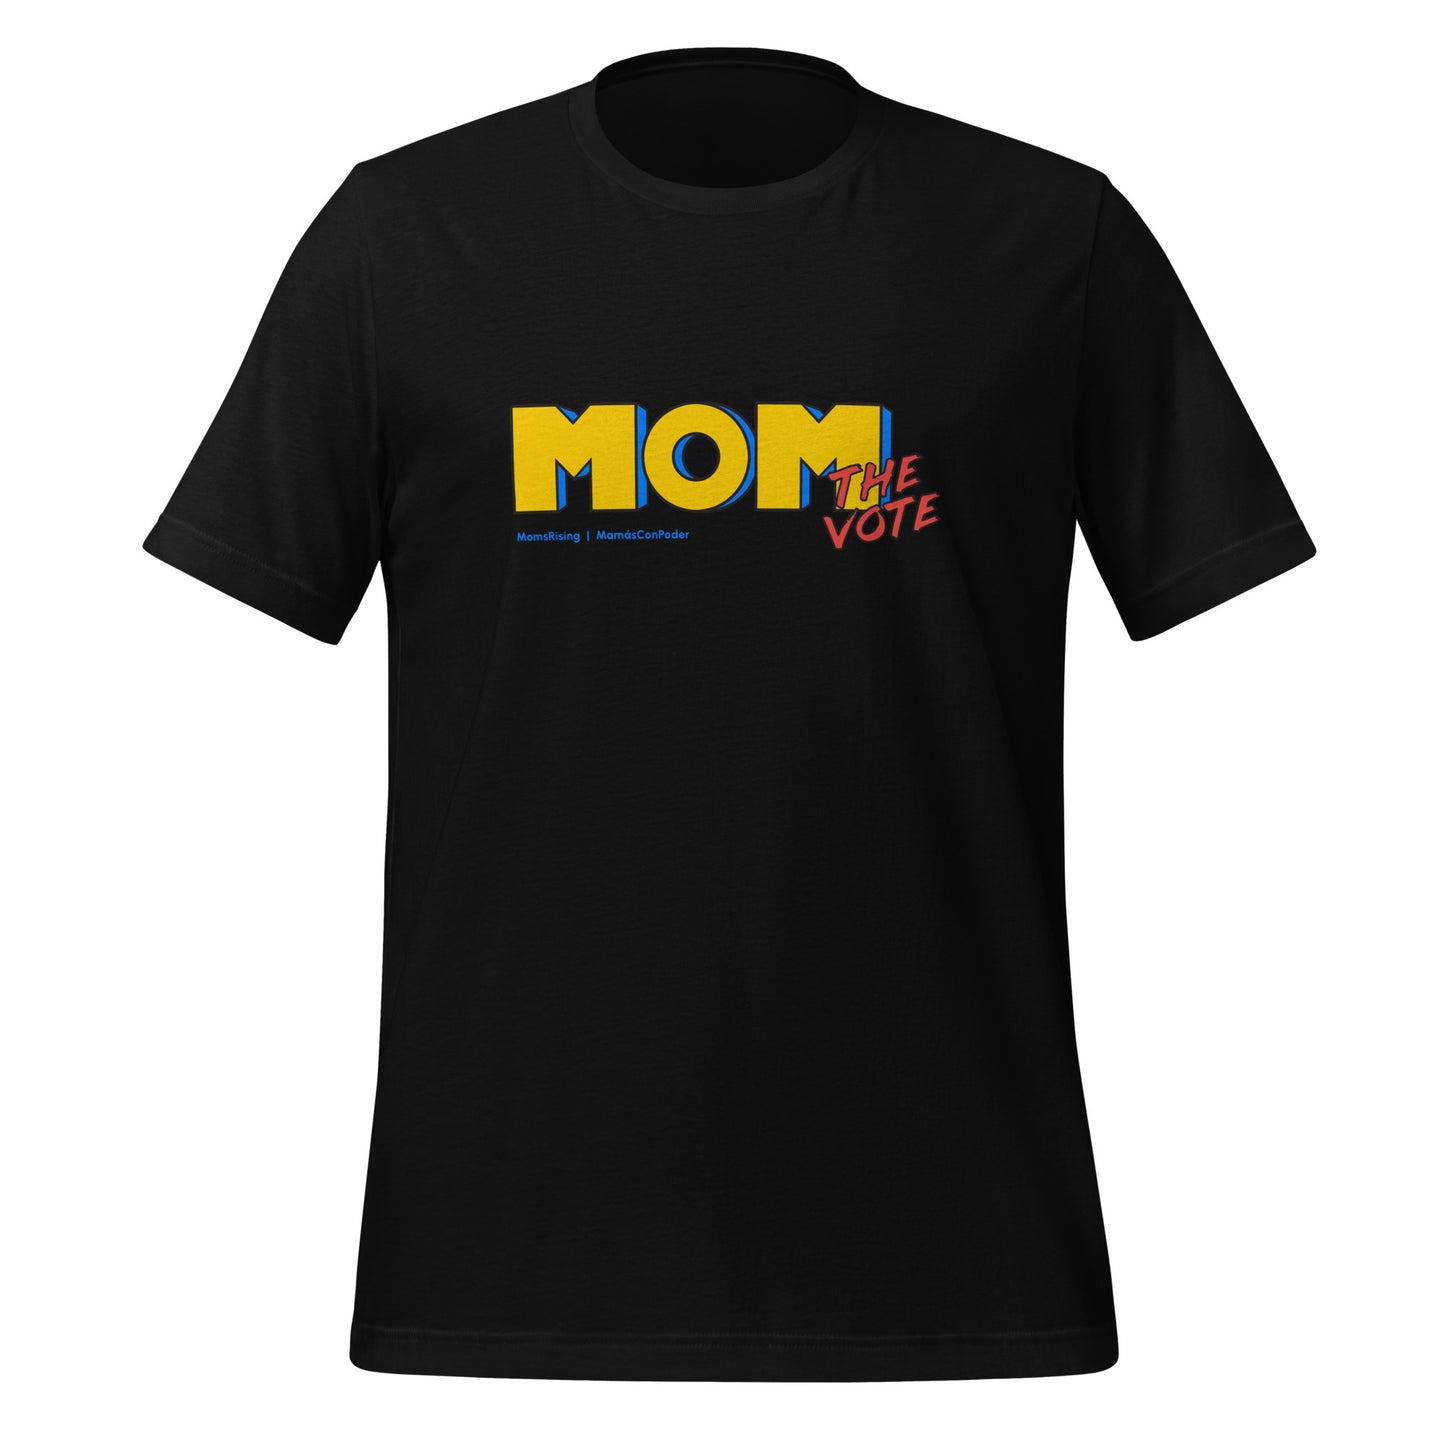 MomTheVote Throwback, relaxed fit t-shirt